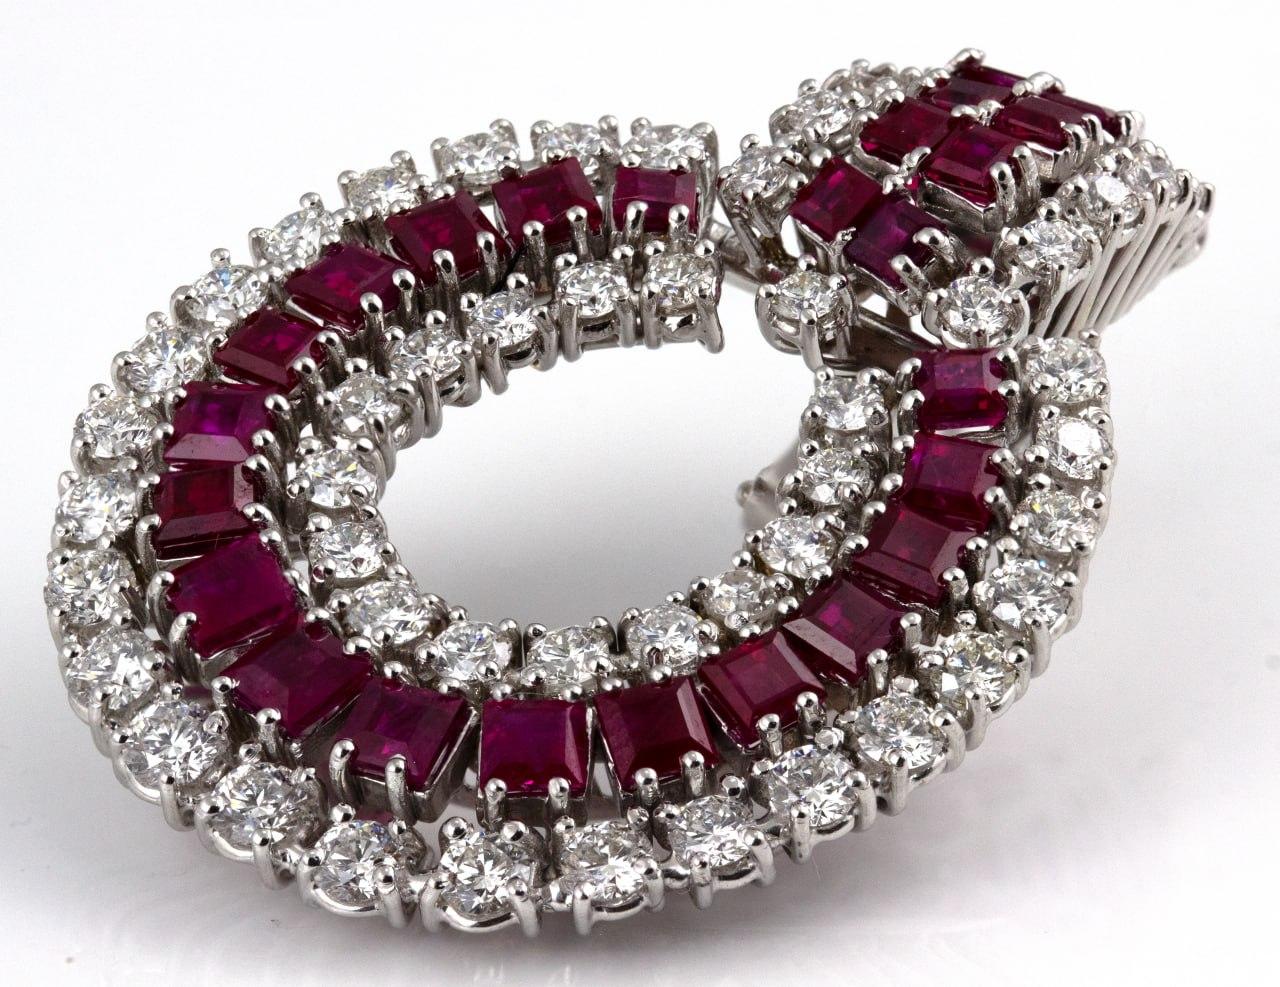 Made in Italy for Galleria Cellini
Burma Ruby: 19.00ctw
Carre Cut
Origin: Burma - Myanmar
Color: Intense Red
Diamonds: 9.00ctw
Round Cut
Color: G/H
Clarity: IF - VS
Certified by Istituto Gemmologico Nazionale
I.G.M. Report N. 23946
Retail price: